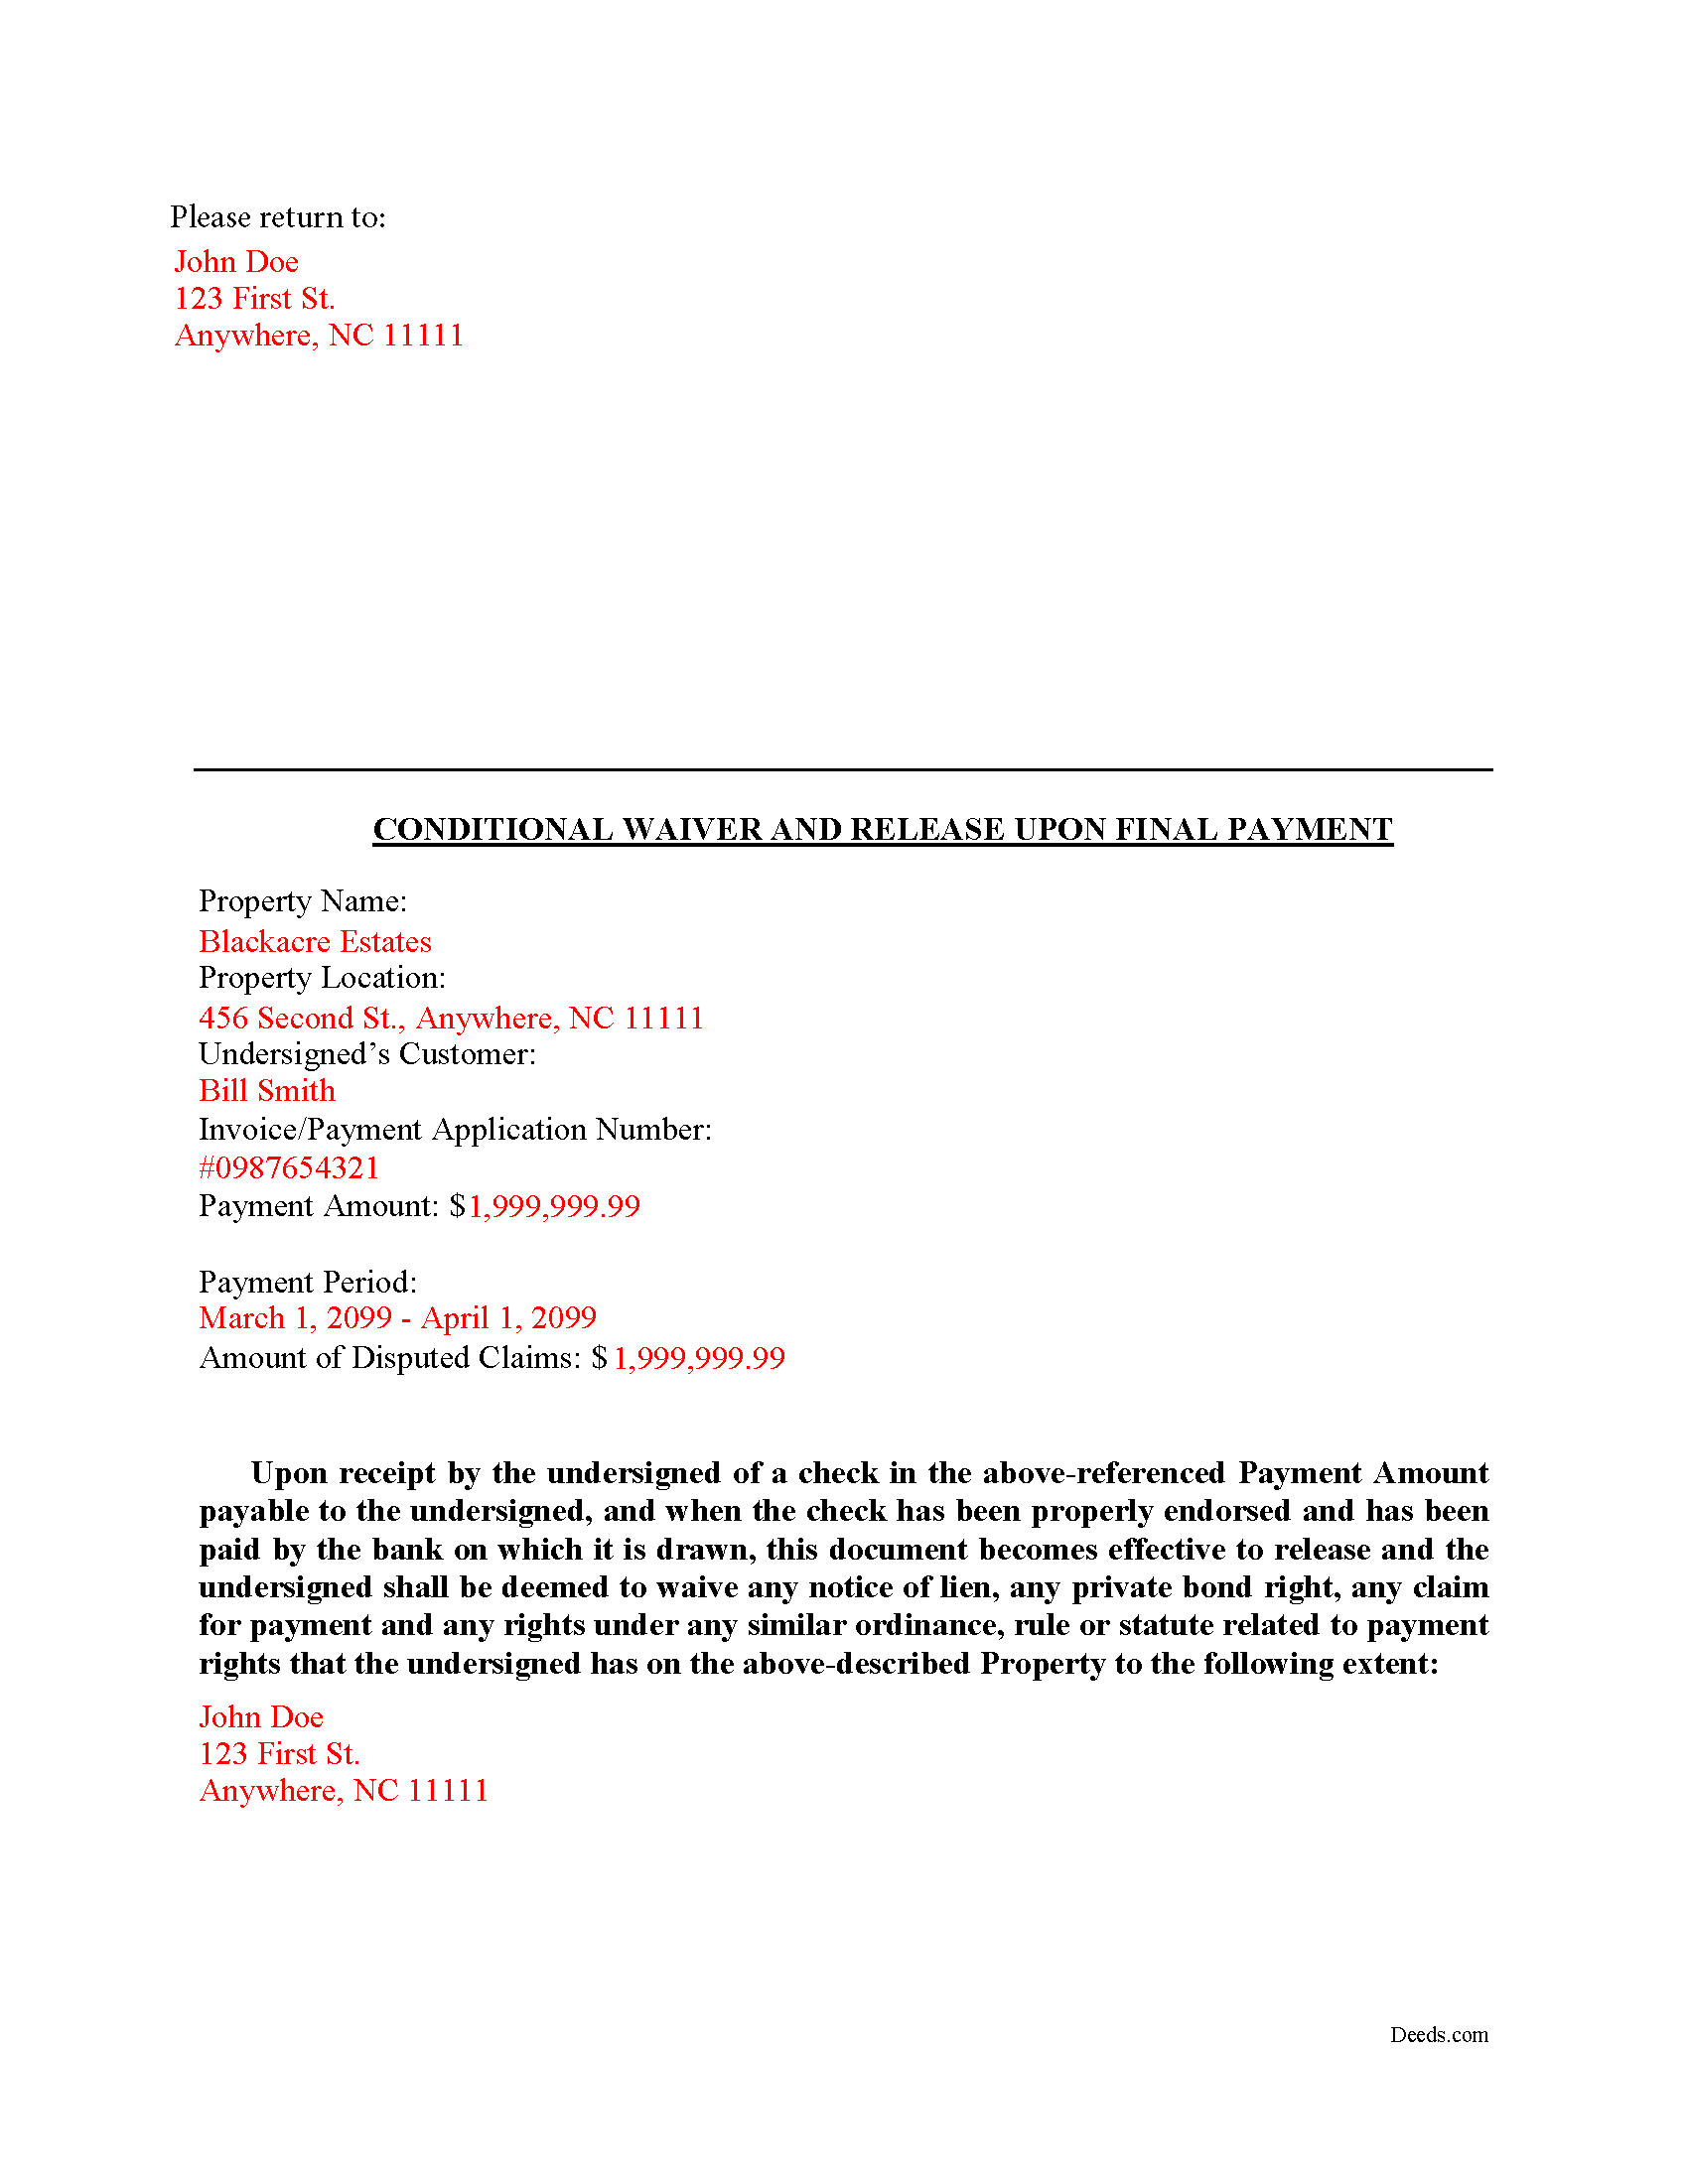 Completed Example of the Conditional Waiver on Final Payment Document